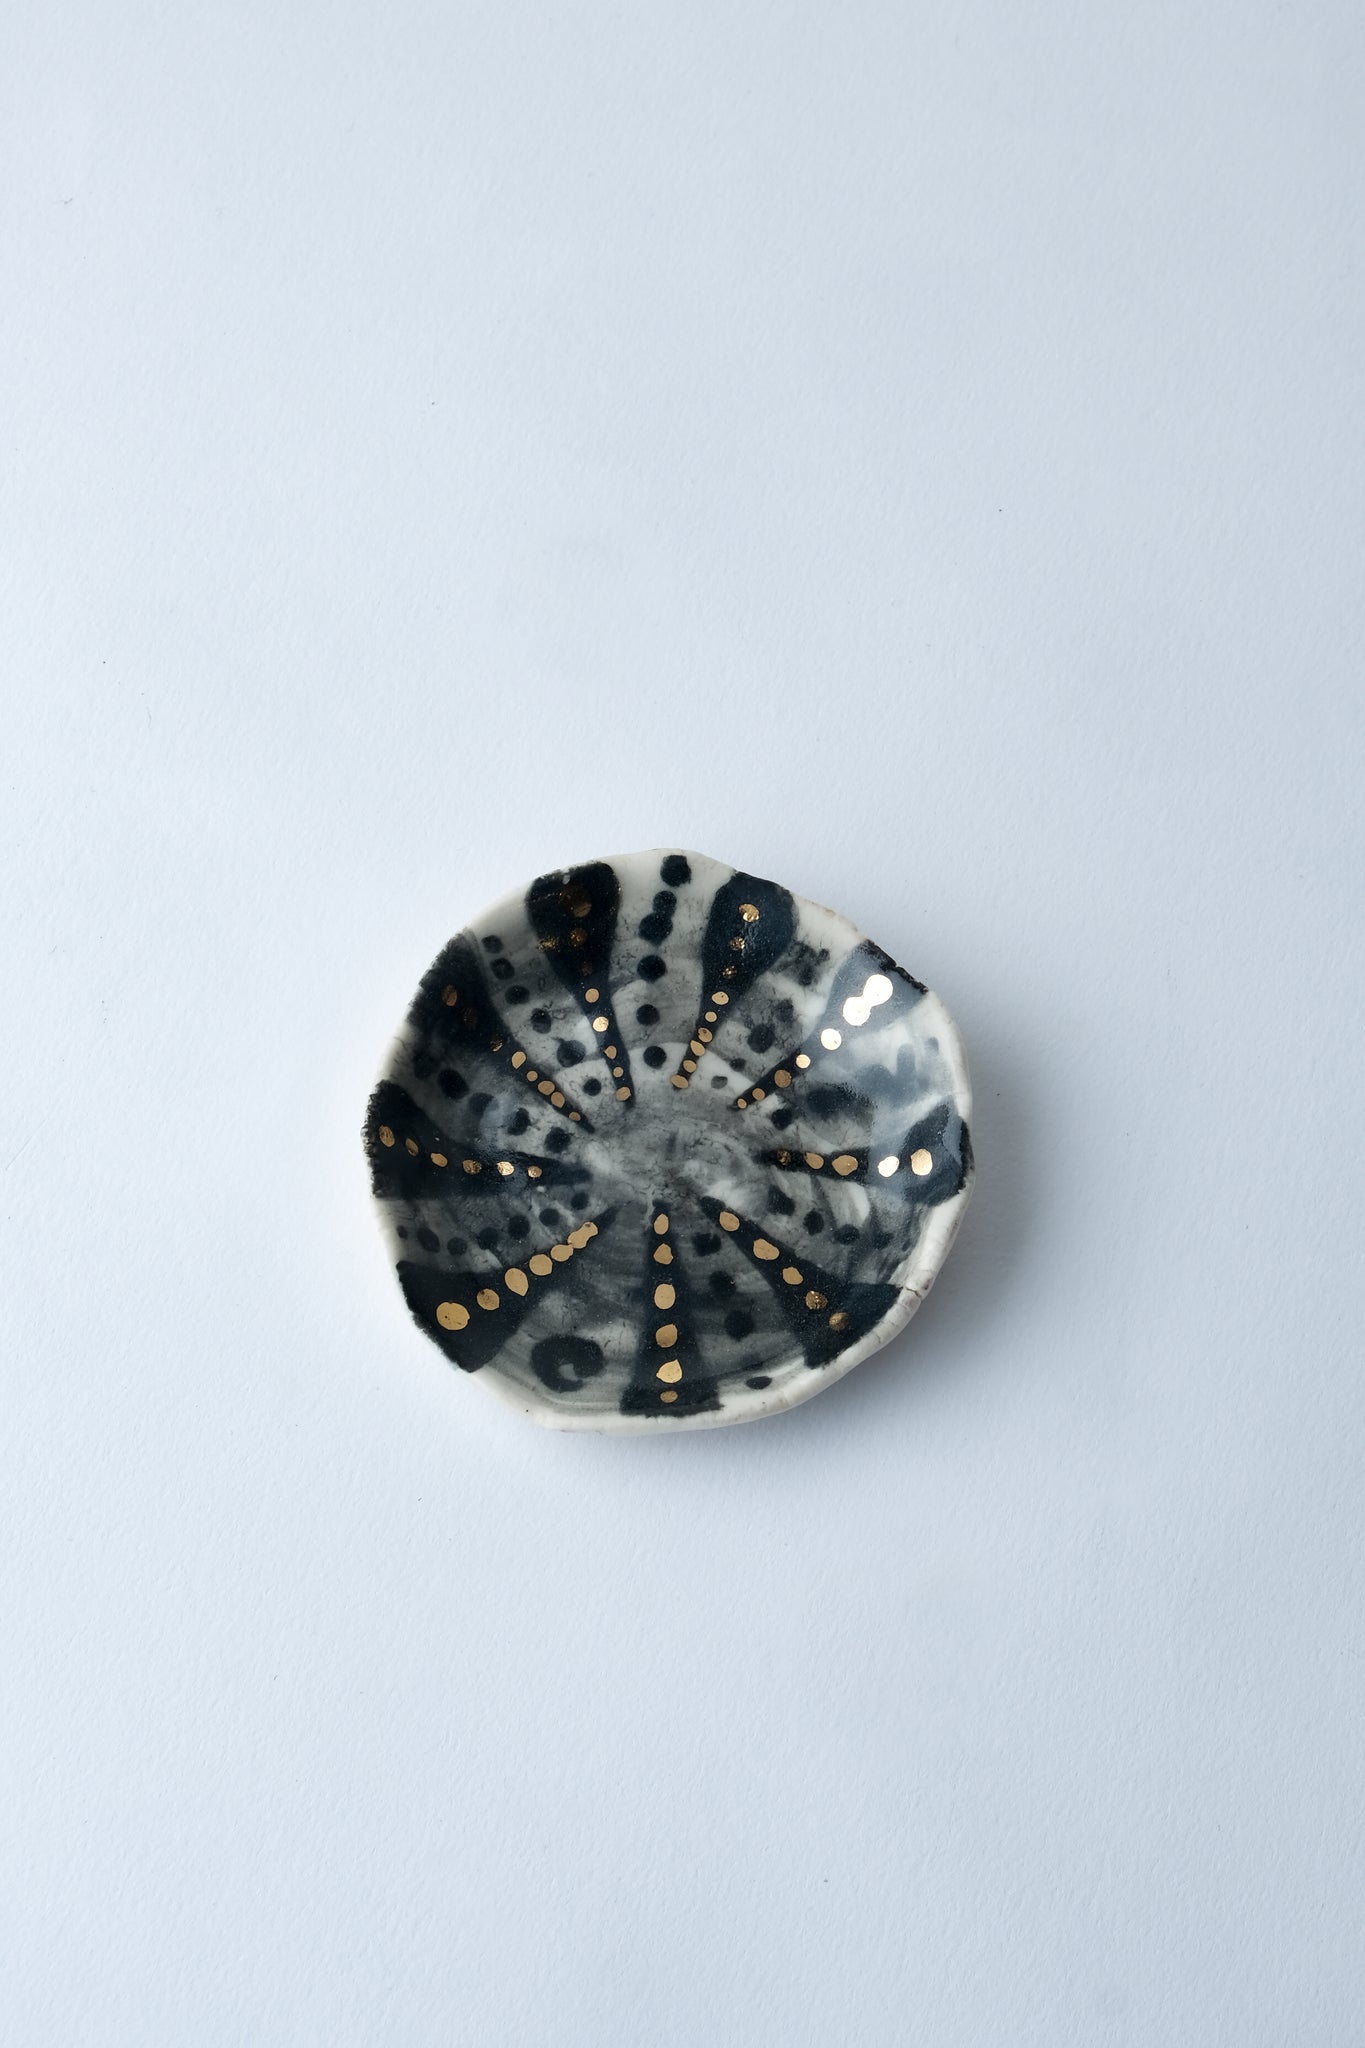 1/1 – Small Porcelain Jewelry Plate with Gold